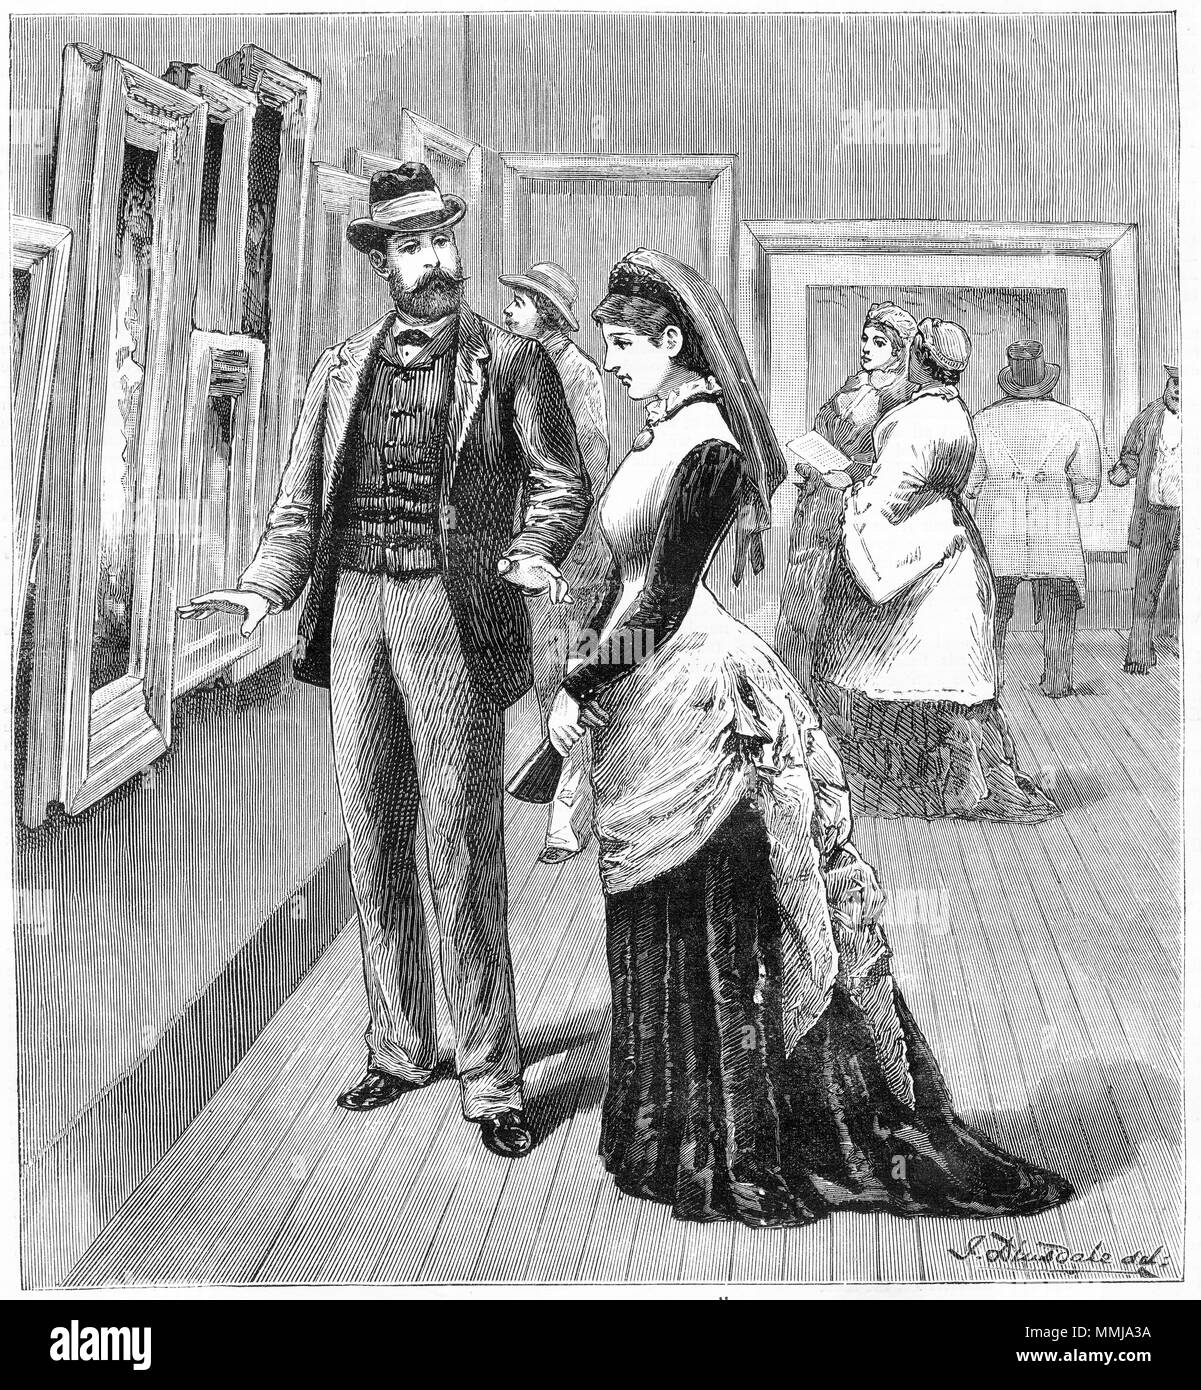 Engraving of a young couple from the Victorian era examining paintings in an art gallery. From an original engraving in the Girl's Own Paper magazine 1883. Stock Photo